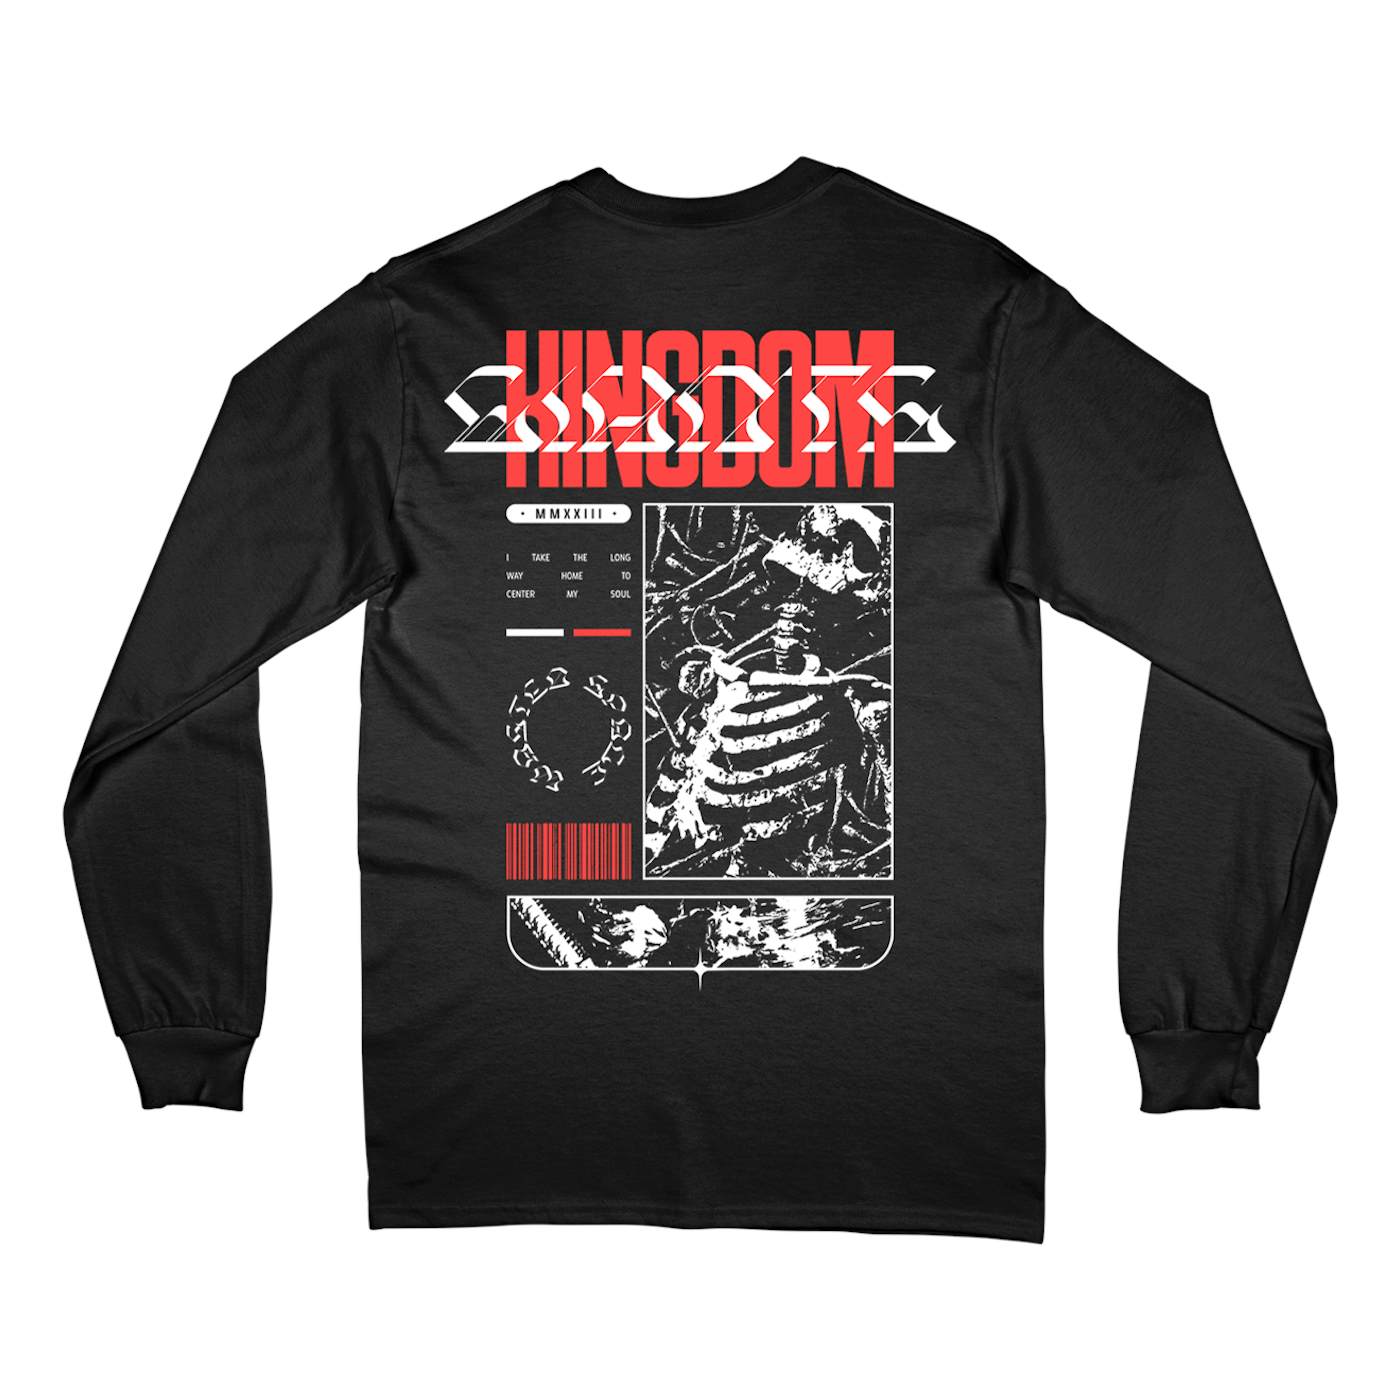 Kingdom Of Giants "Wasted Space" L/S T-Shirt